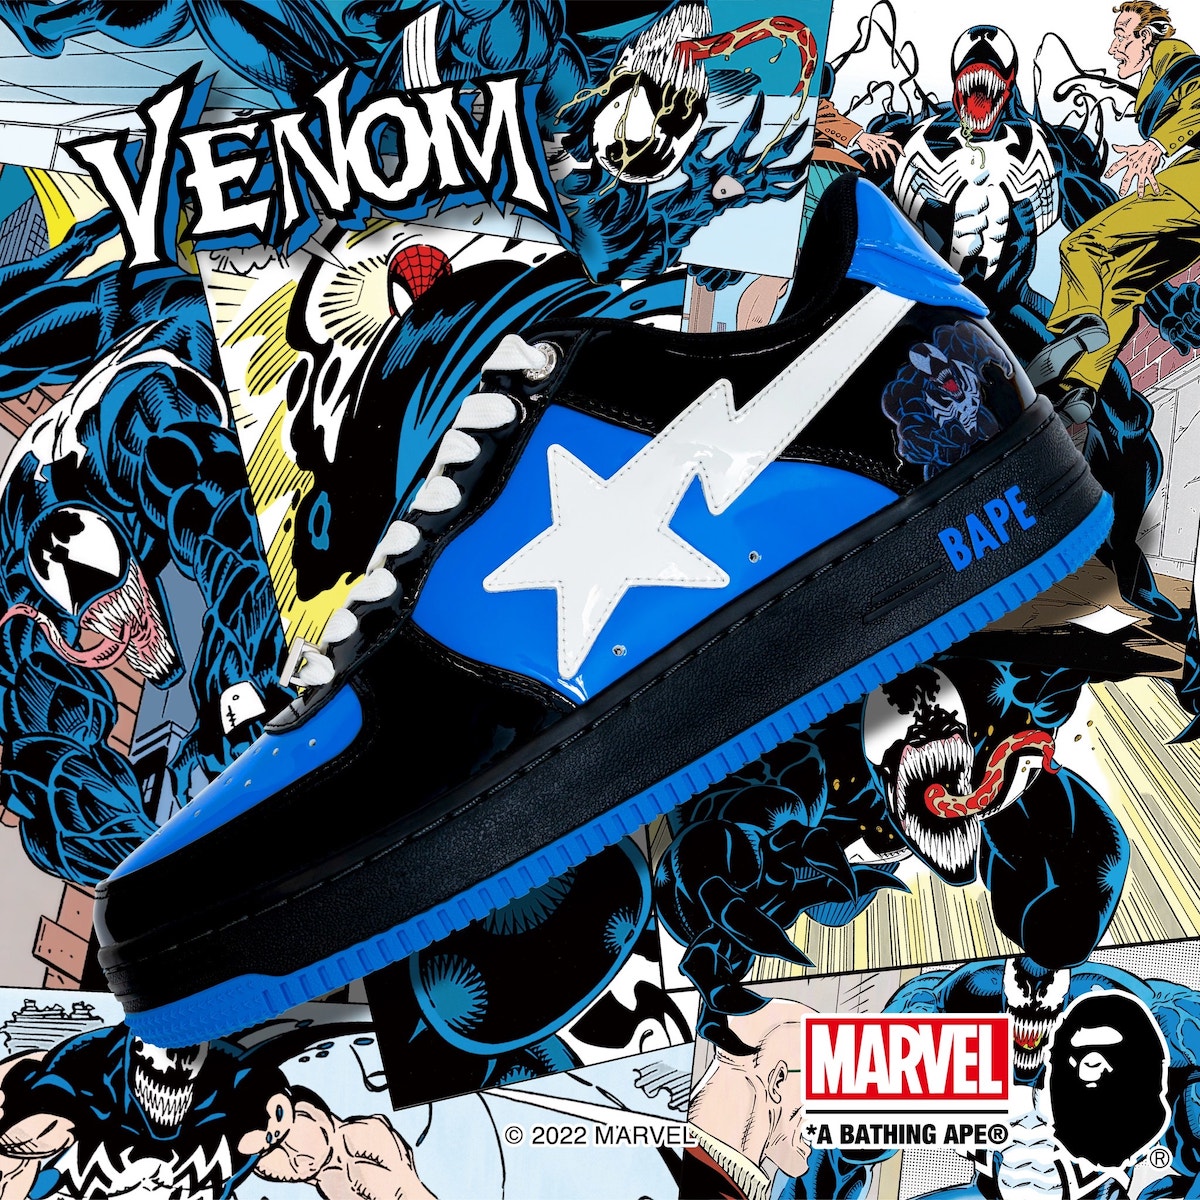 Marvel x Bape Sta 2022 Collection Release Date | SBD